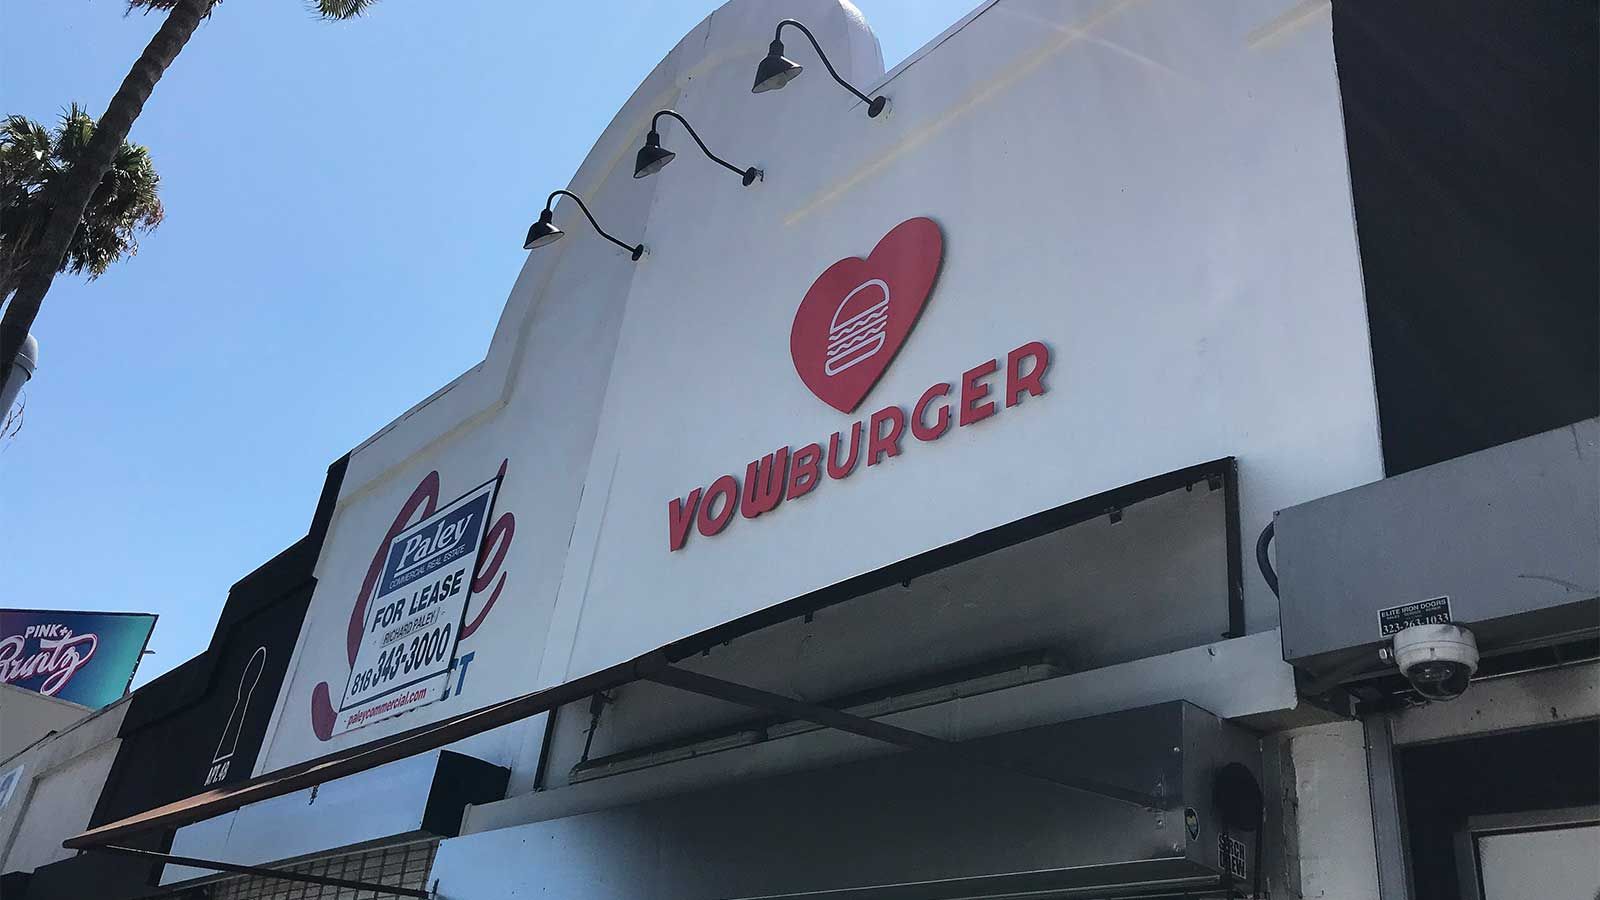 vowburger pin mounted aluminum letters